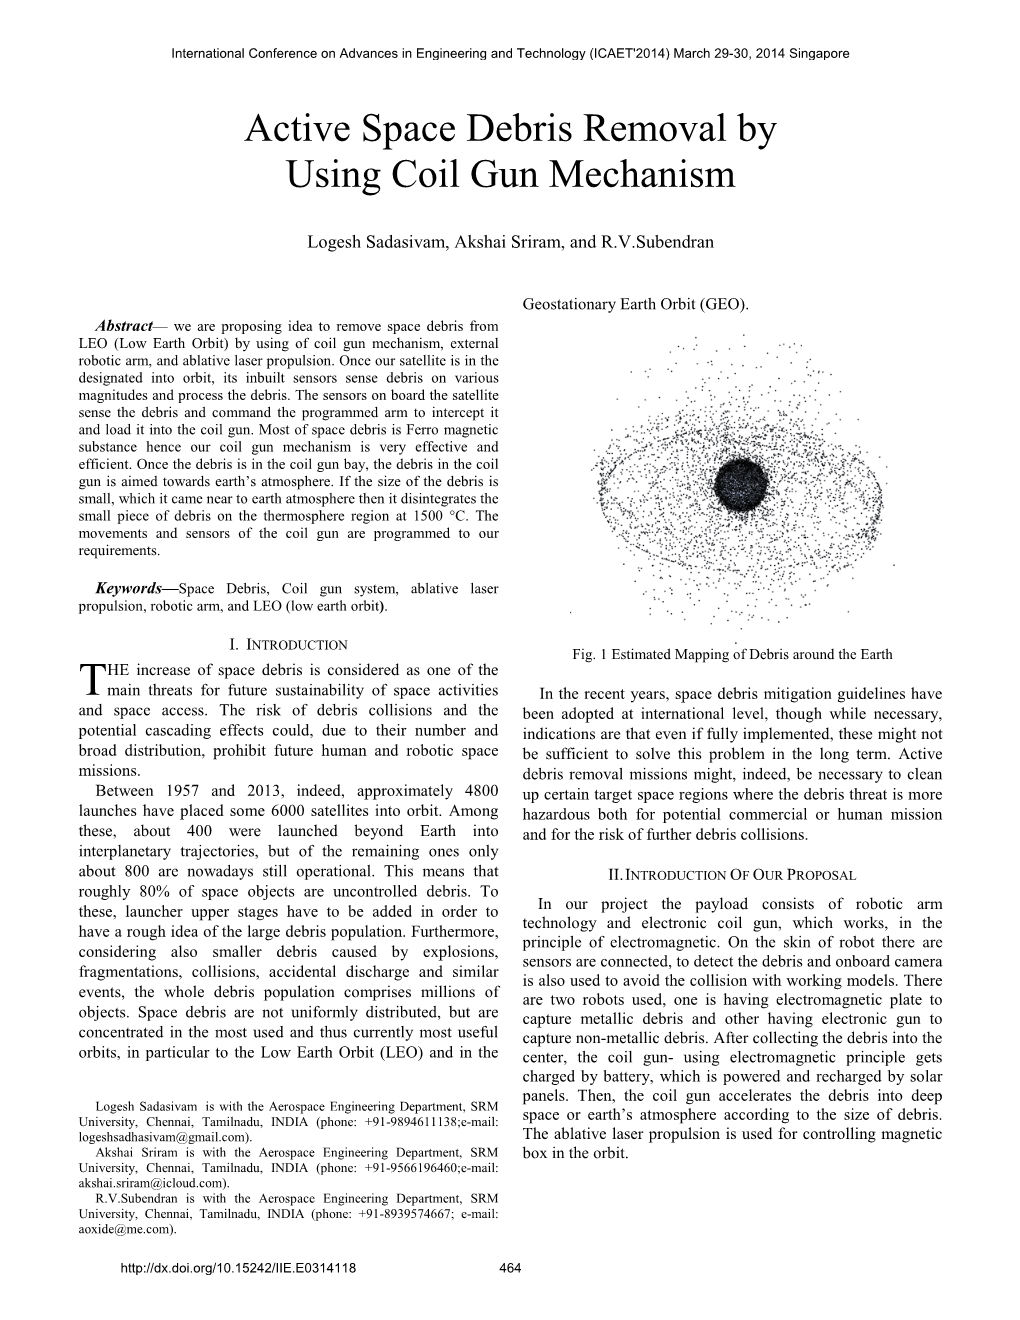 Active Space Debris Removal by Using Coil Gun Mechanism